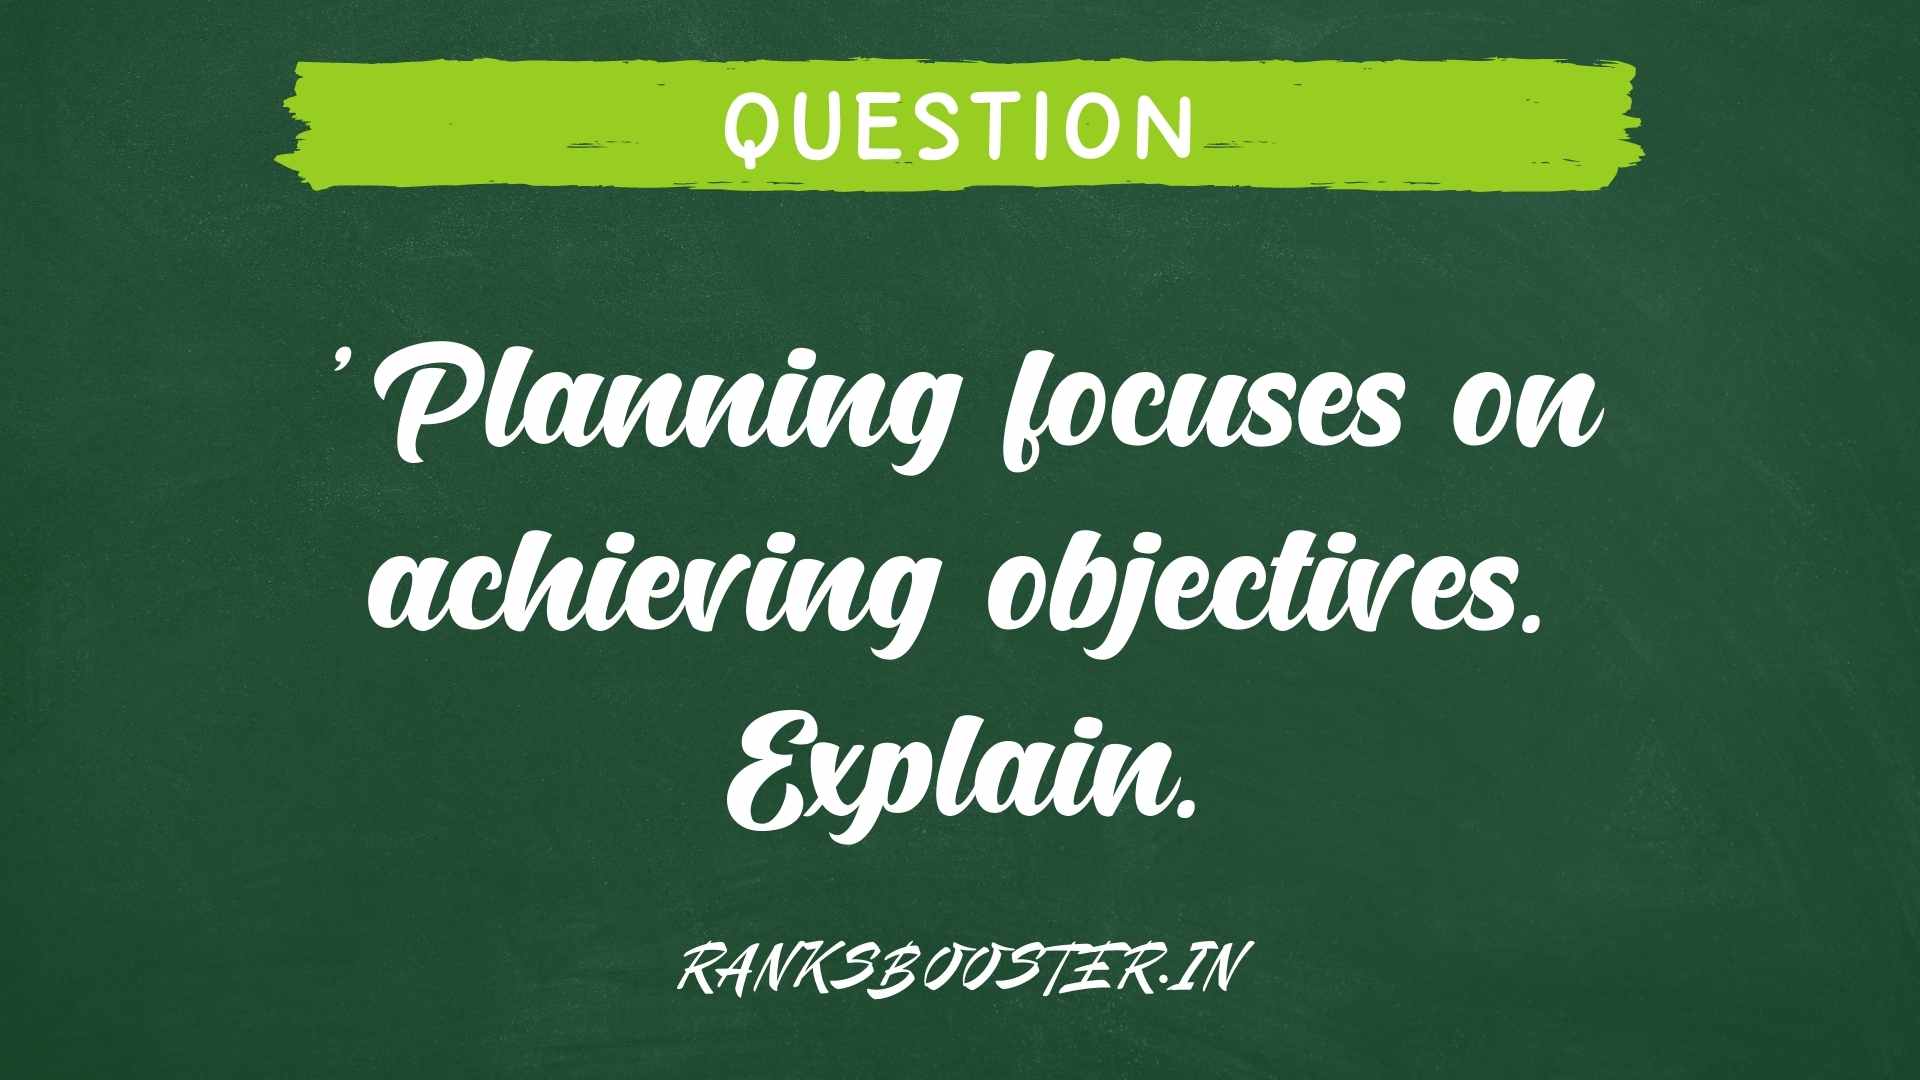 'Planning focuses on achieving objectives. Explain